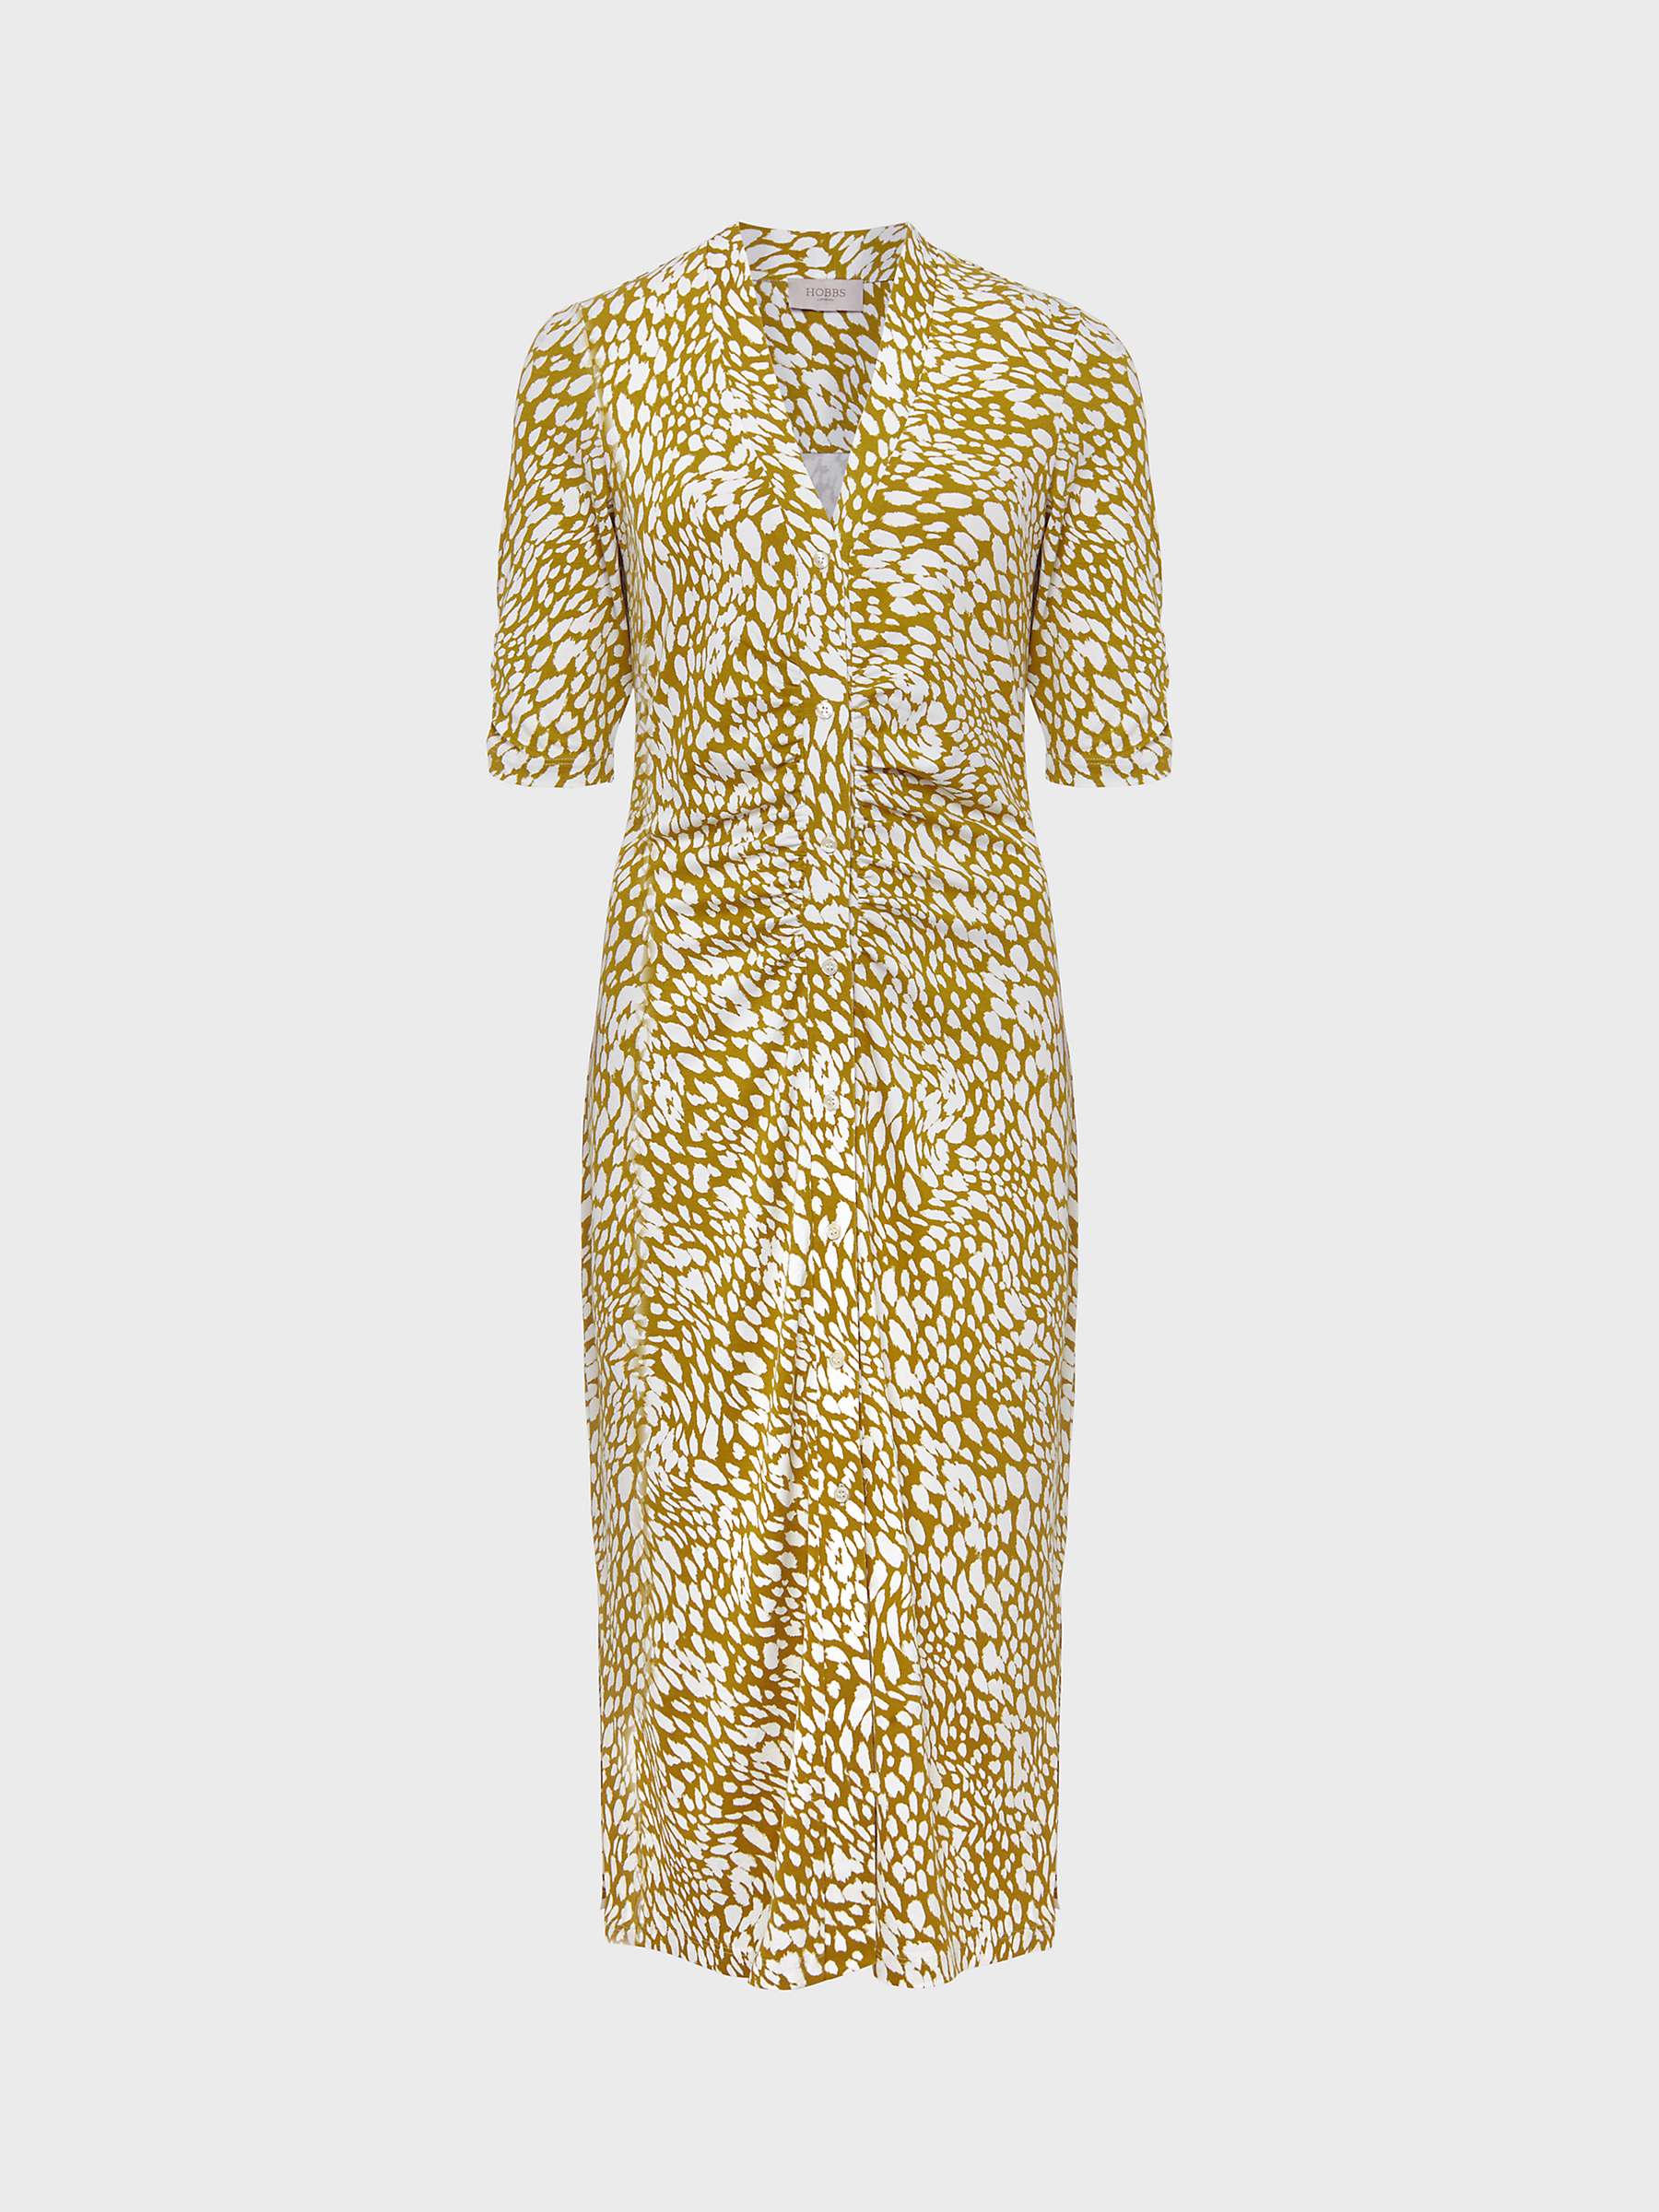 Buy Hobbs Hatty Abstract Print Jersey Midi Dress, Mid Olive/Ivory Online at johnlewis.com